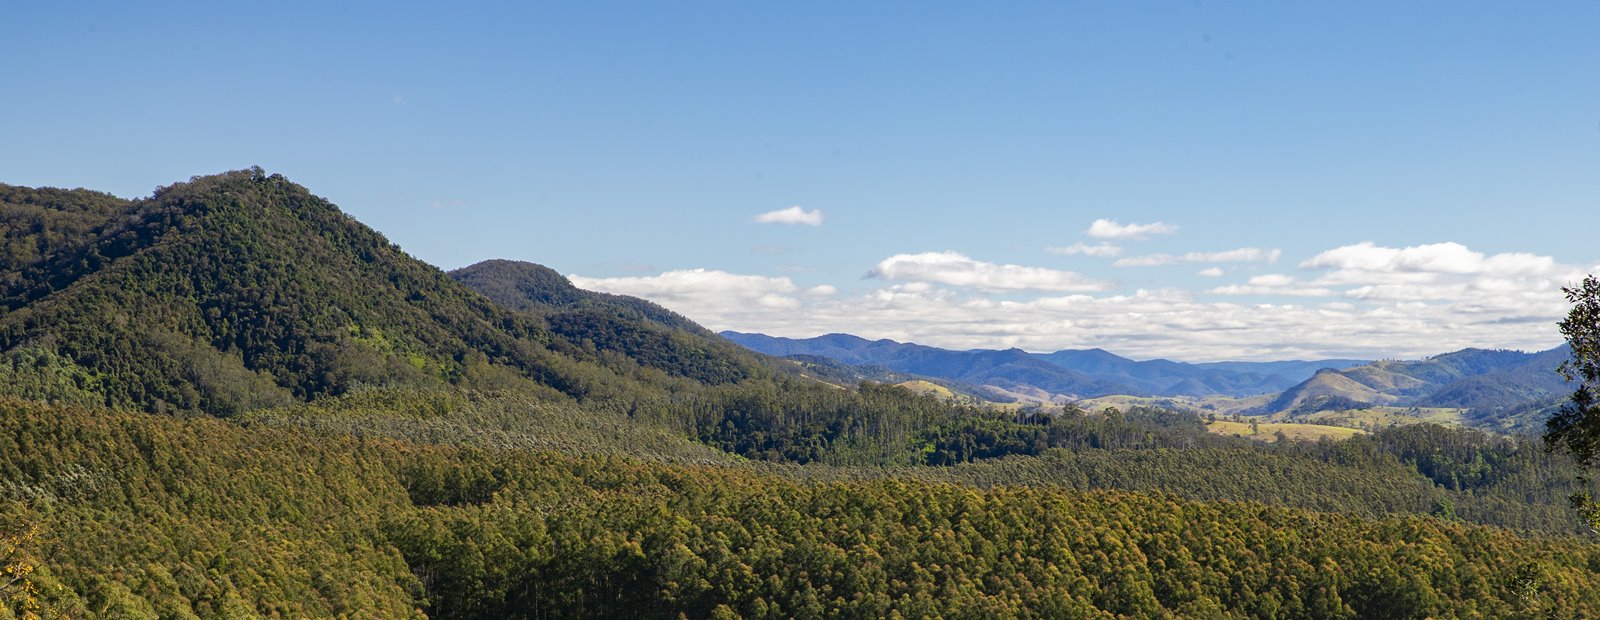 Land suitable for new planted forests in North-East NSW